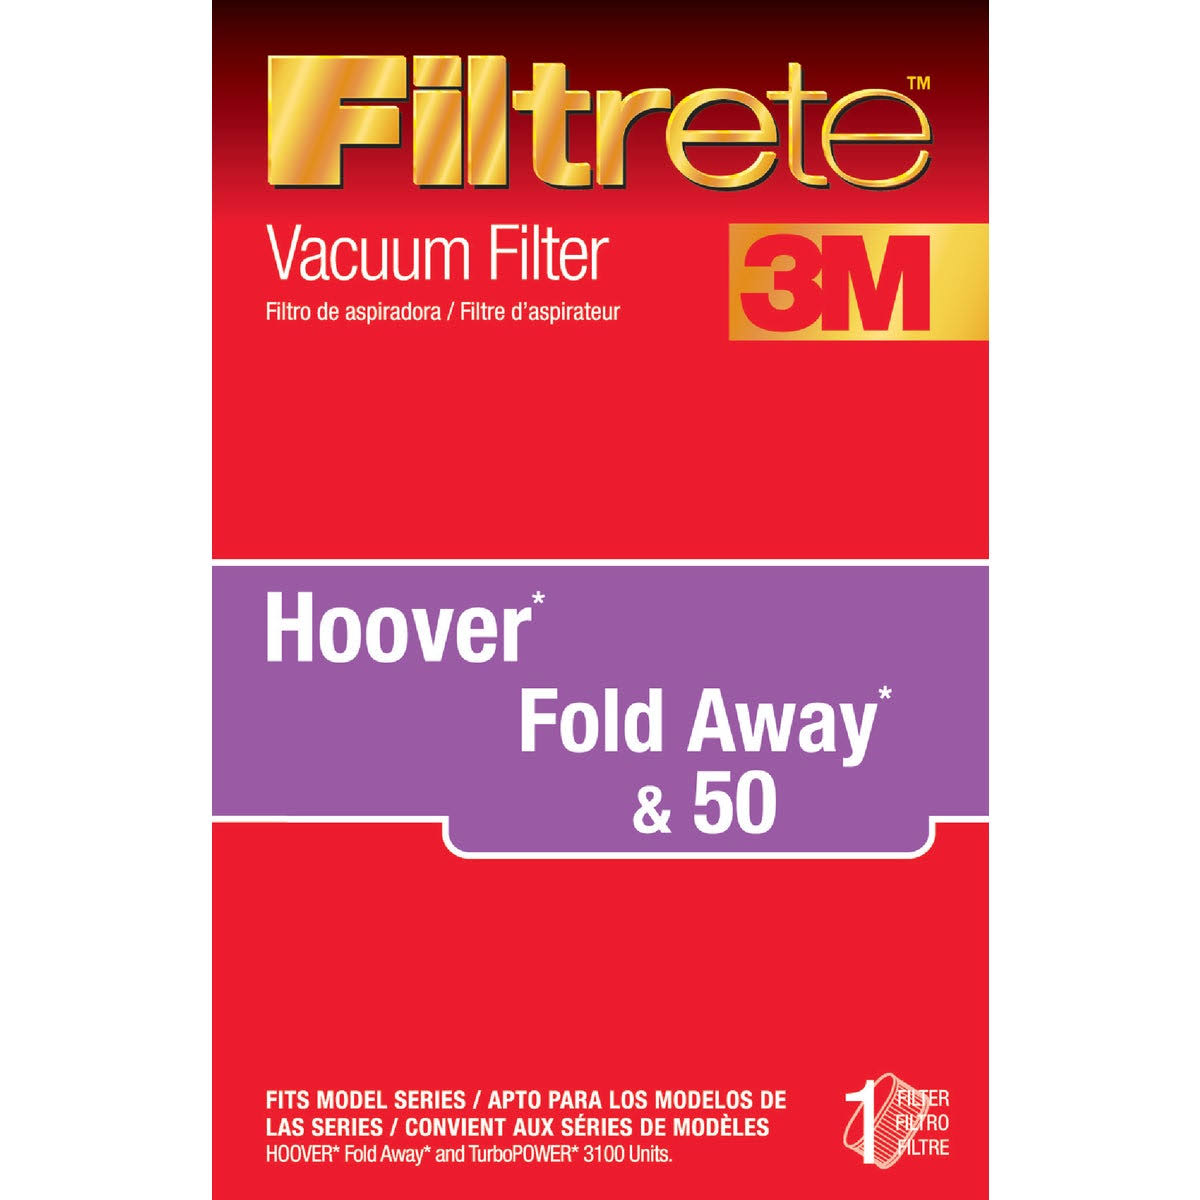 Filtrete 3m Hoover Fold Away and 50 Vacuum Cleaner Filter